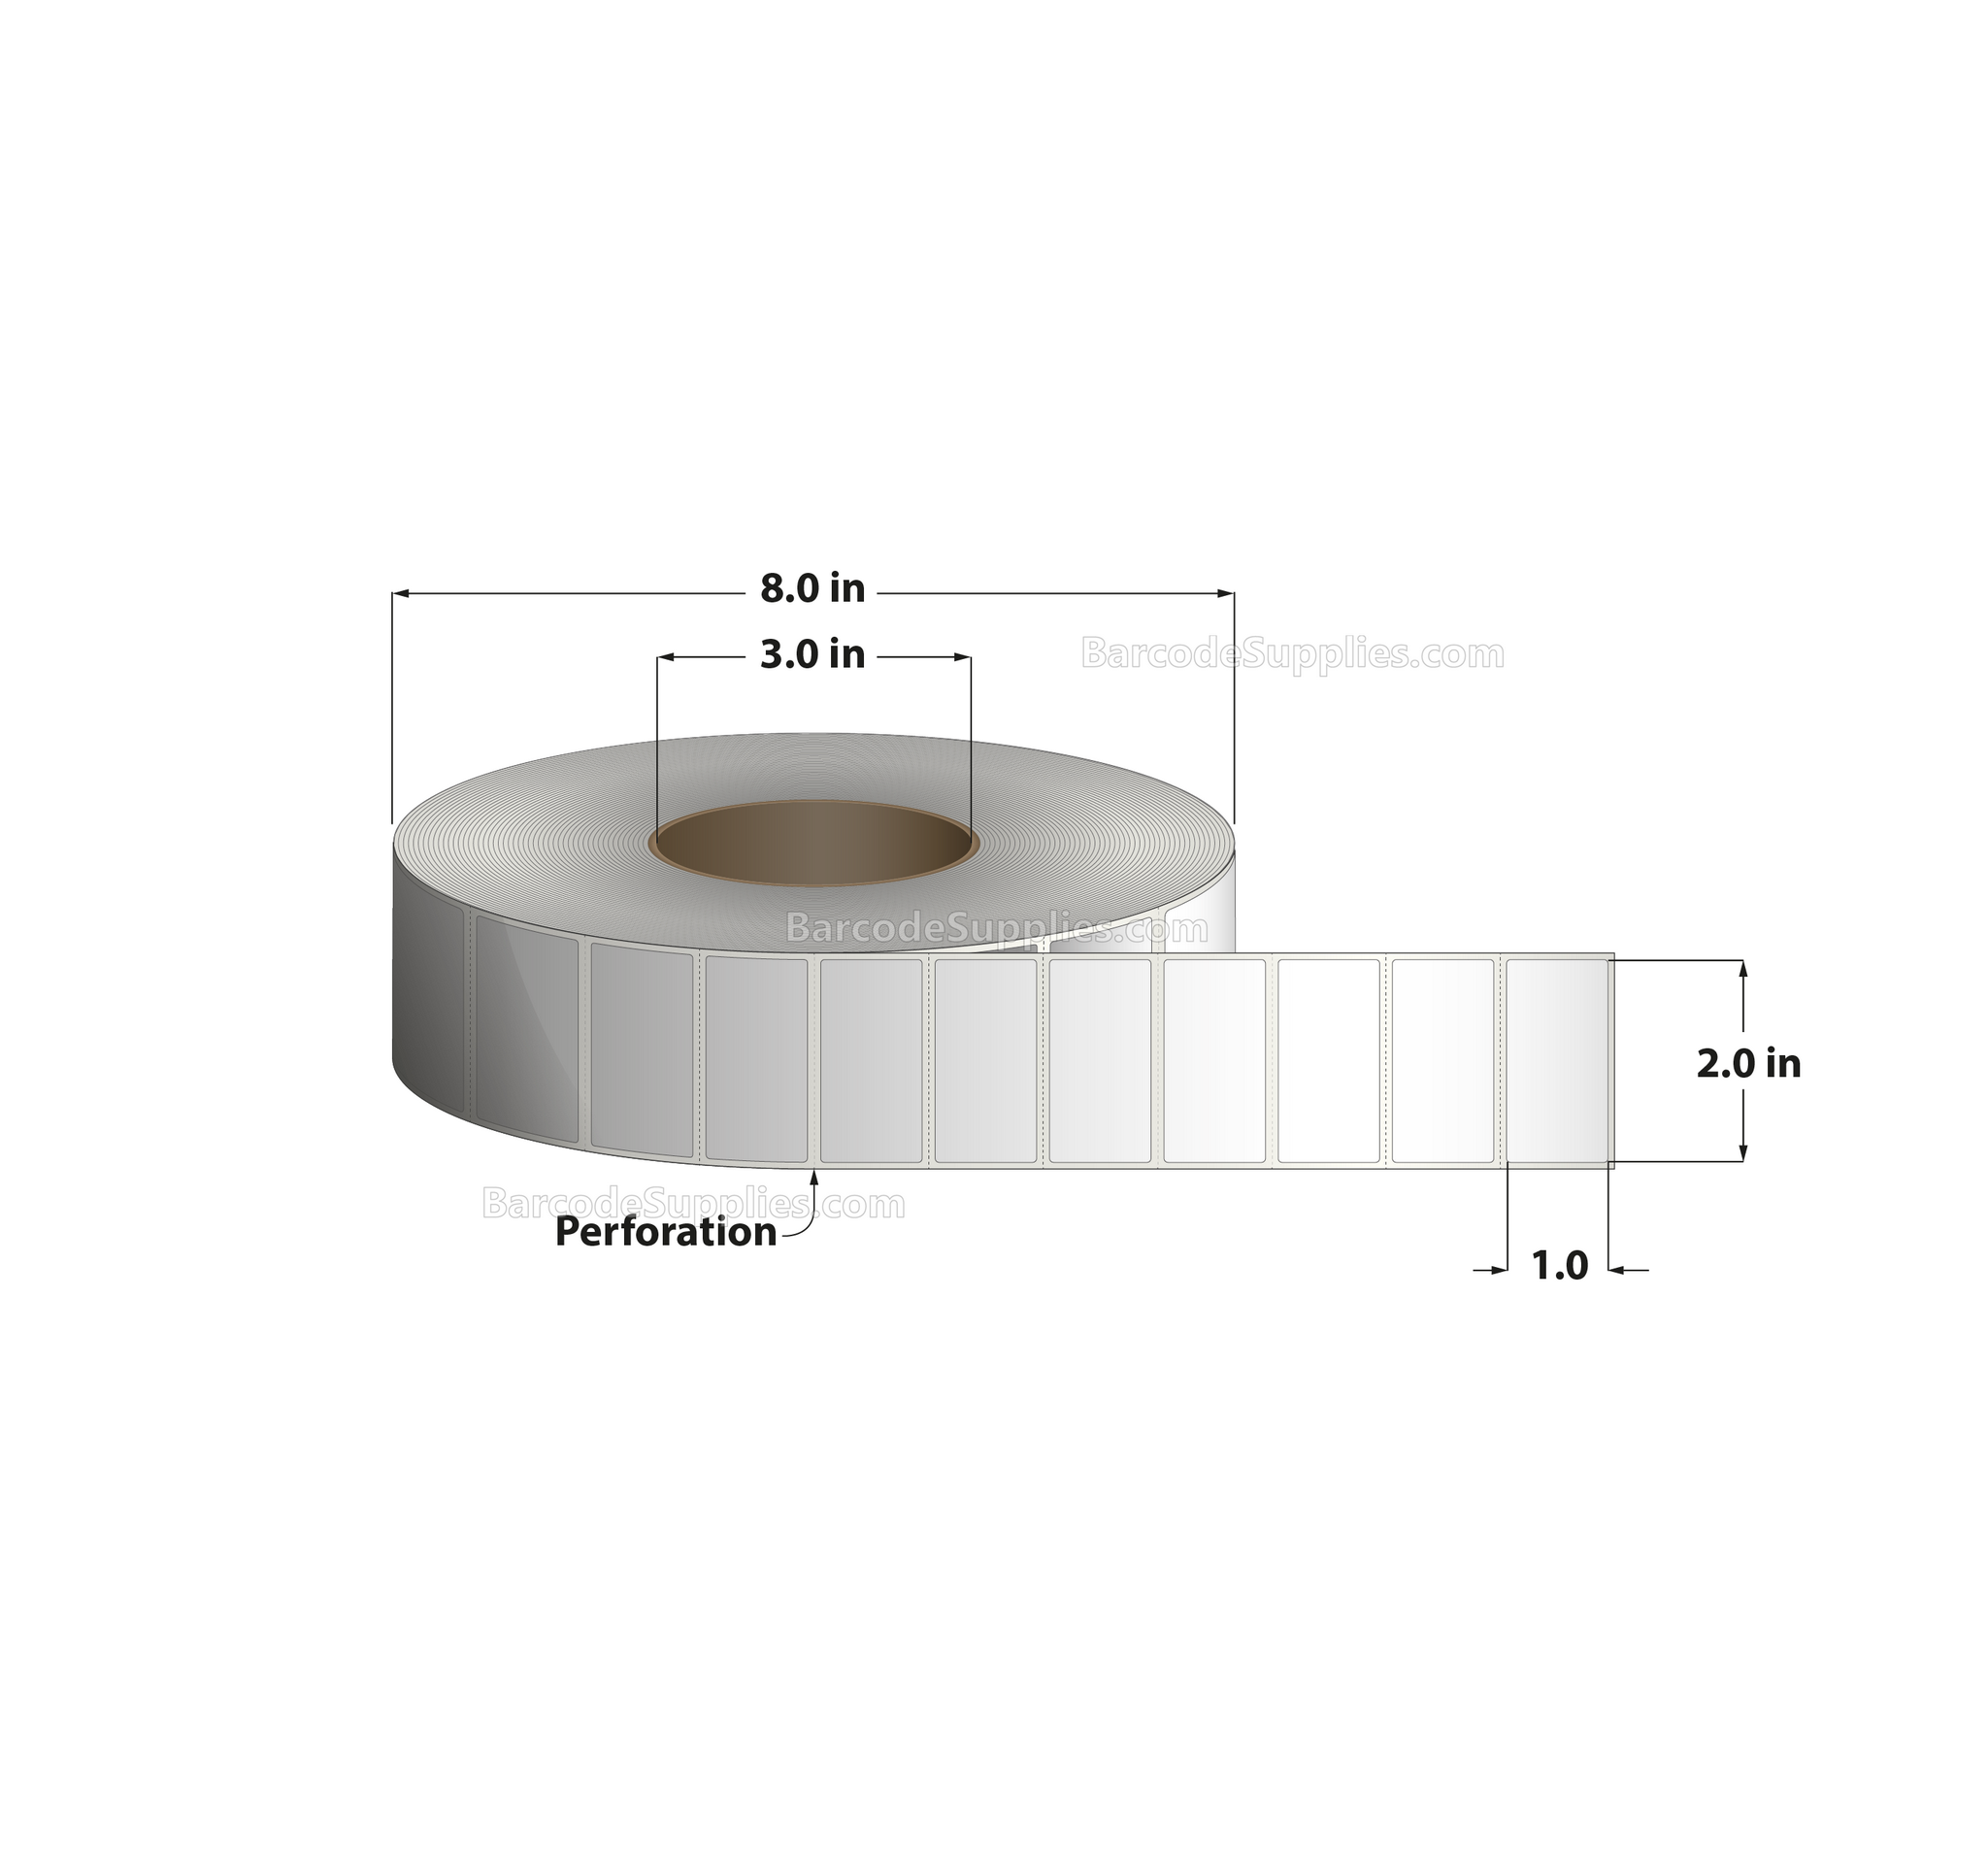 2 x 1 Direct Thermal White Labels With Permanent Acrylic Adhesive - Perforated - 5500 Labels Per Roll - Carton Of 8 Rolls - 44000 Labels Total - MPN: DT21-1P